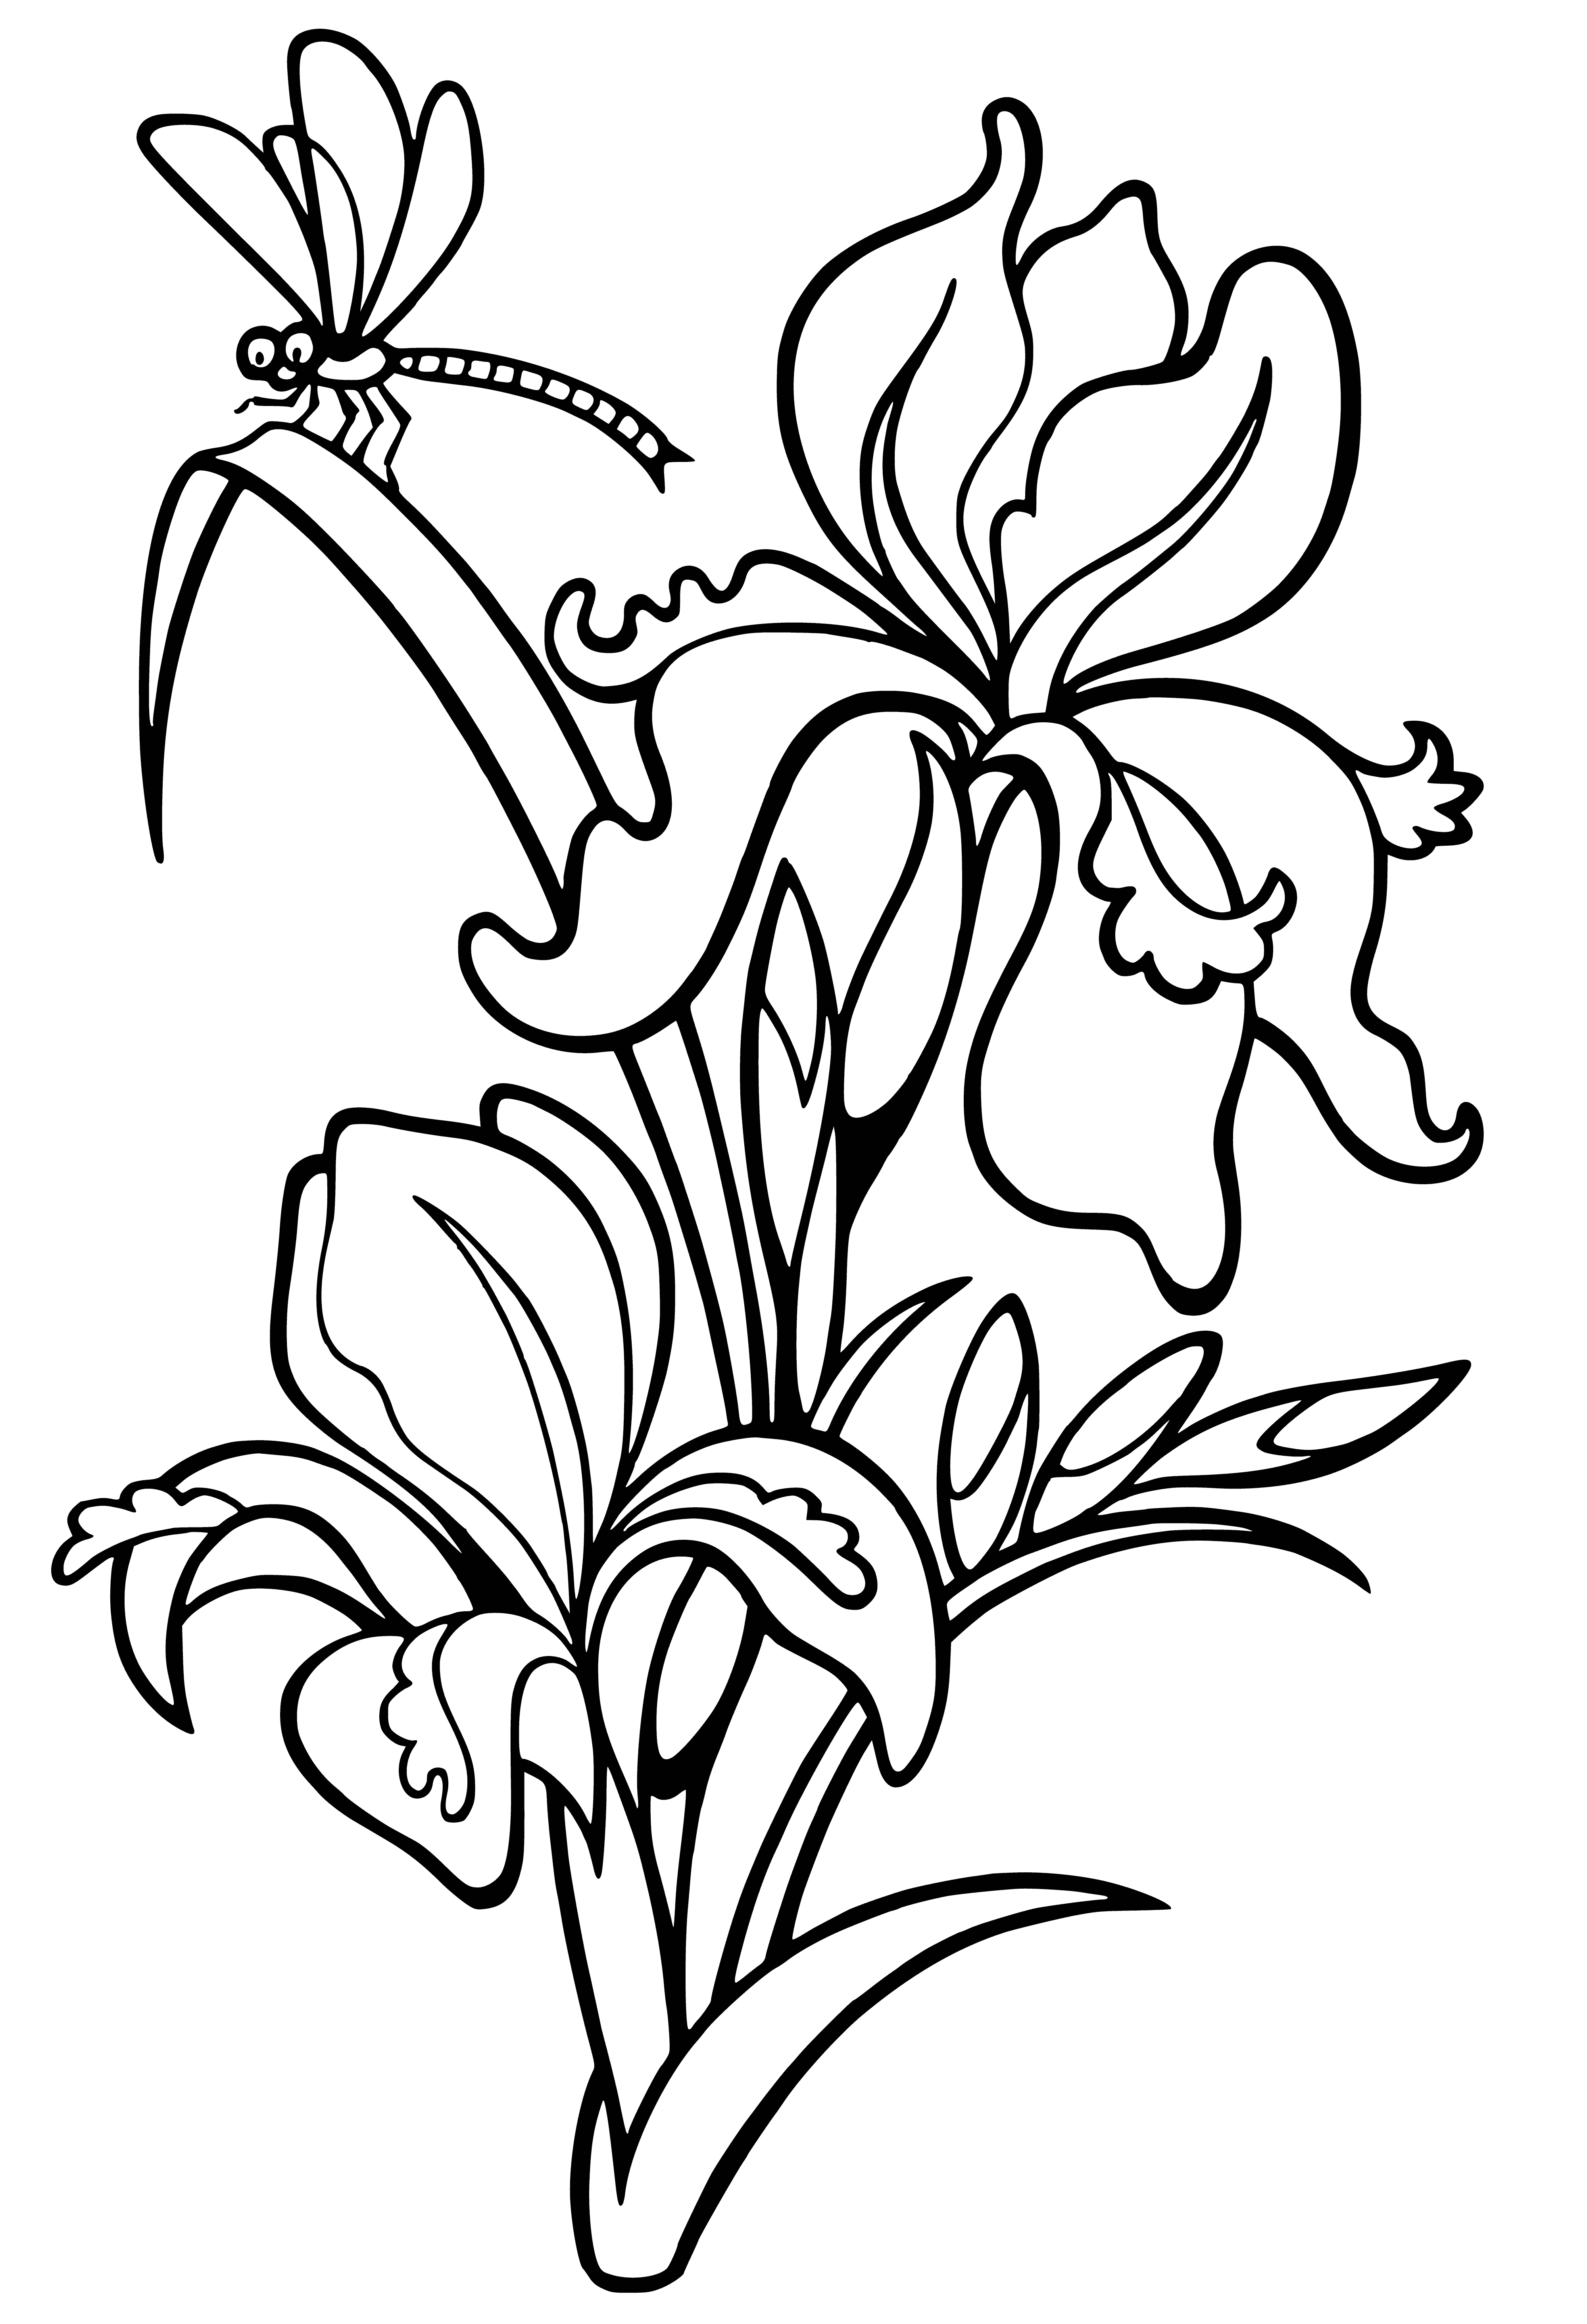 coloring page: Tall plant with pointy leaves, purple/yellow cone-shaped flower; center yellow, furry.